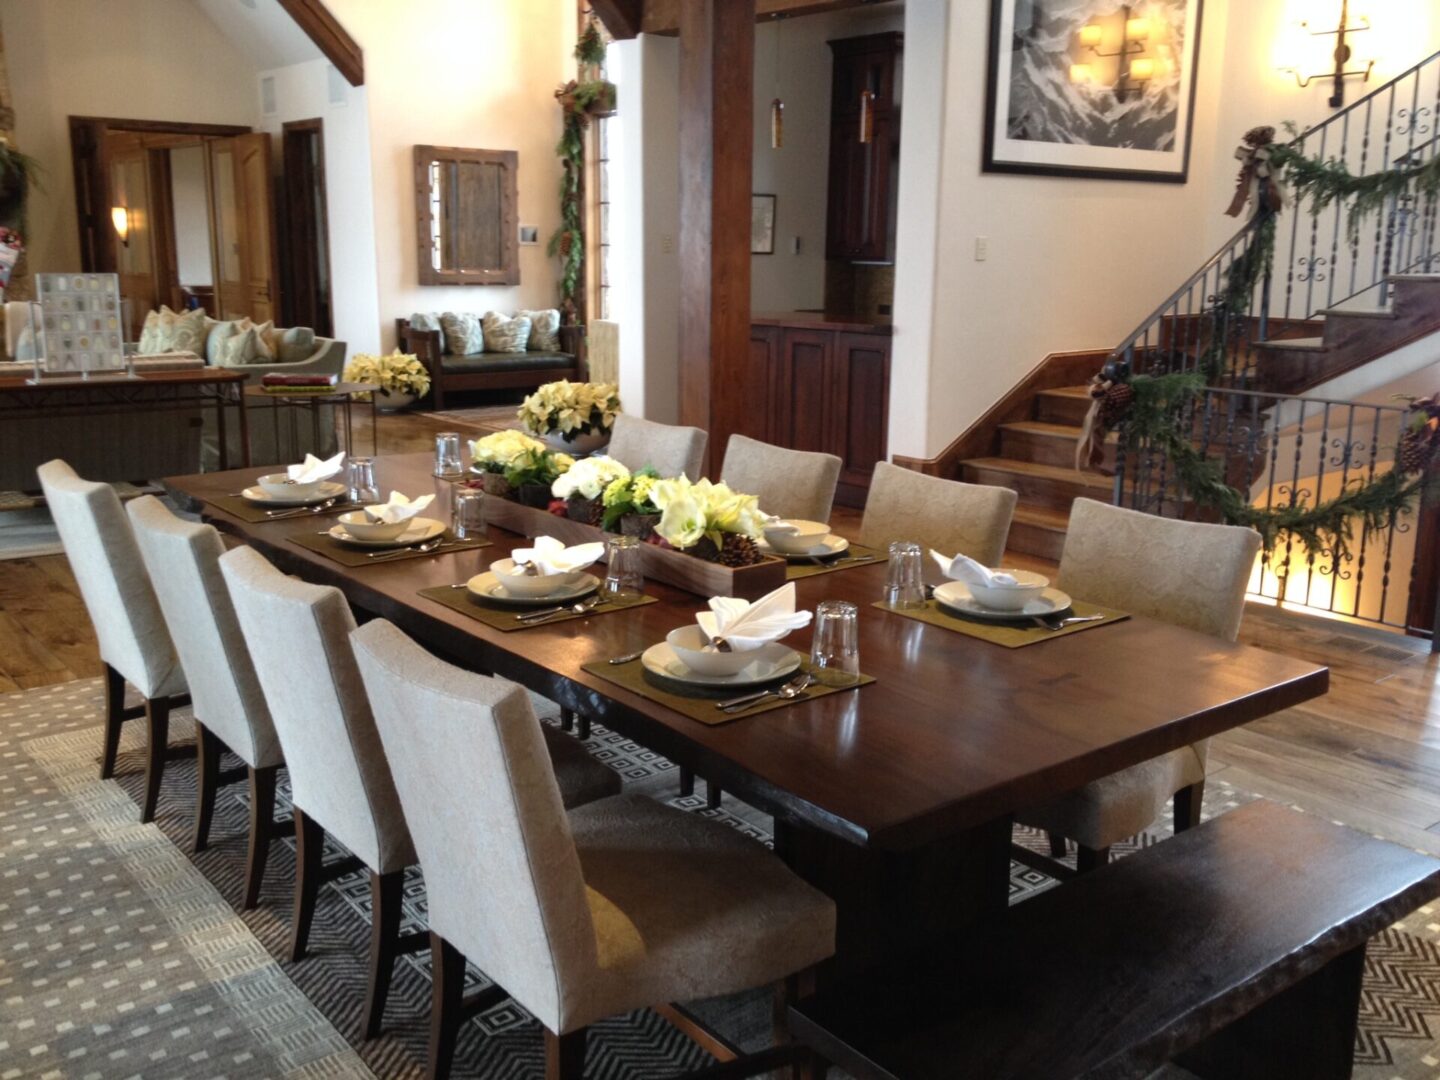 A large dining room table with chairs and plates.